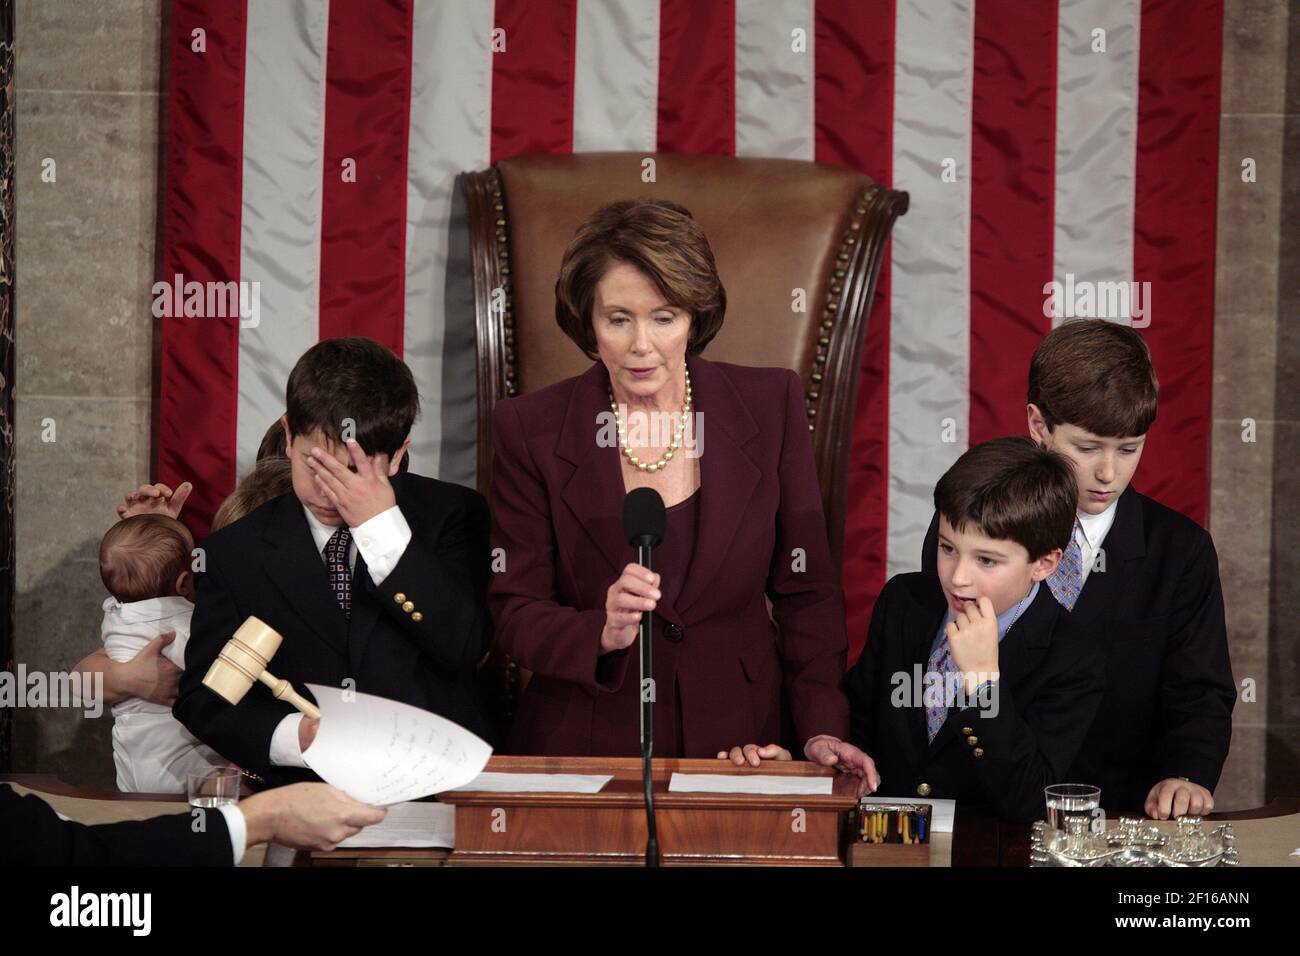 U.S. Rep. Nancy Pelosi (D-CA) is surrounded by family as she takes the podium for the first time in the position of Speaker of the House, becoming the first woman to hold that position, on the opening day of the legislative session on Thursday, January 4, 2006, in Washington, DC. (Photo by Chuck Kennedy/MCT/Sipa USA) Stock Photo